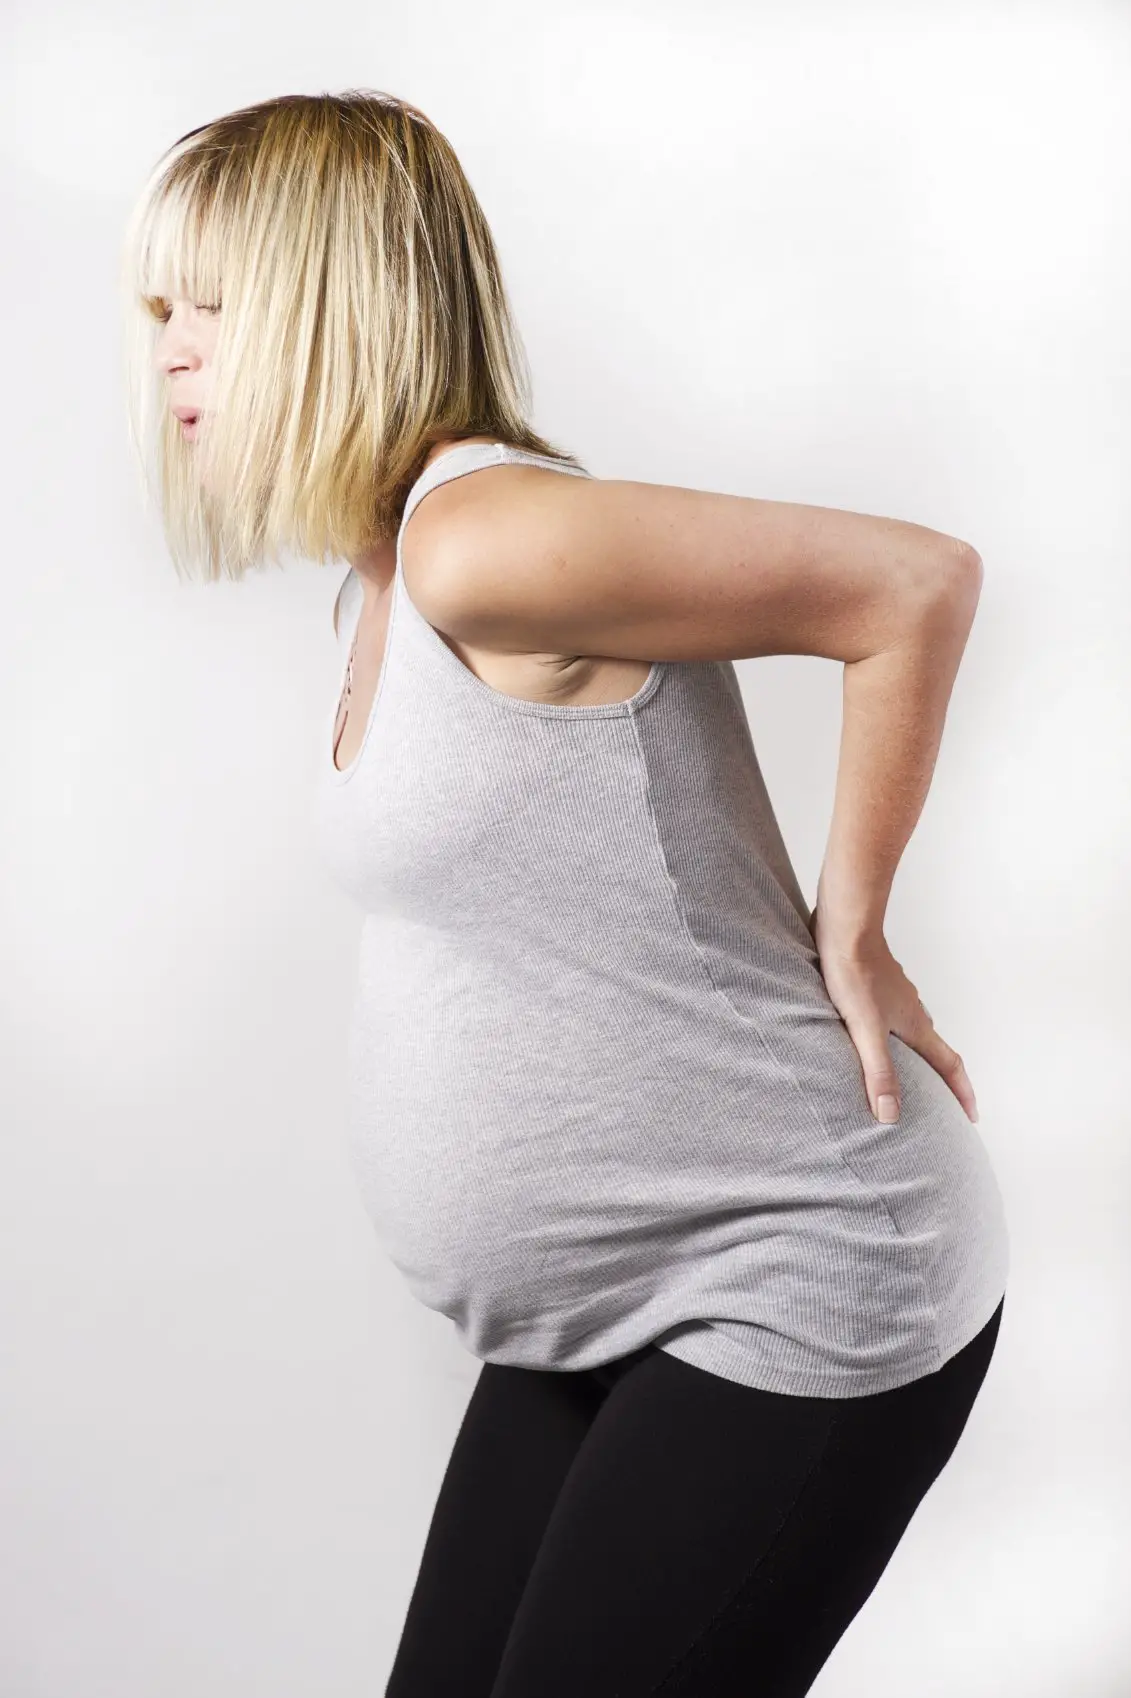 Why Do You Have Back Pain During Pregnancy?